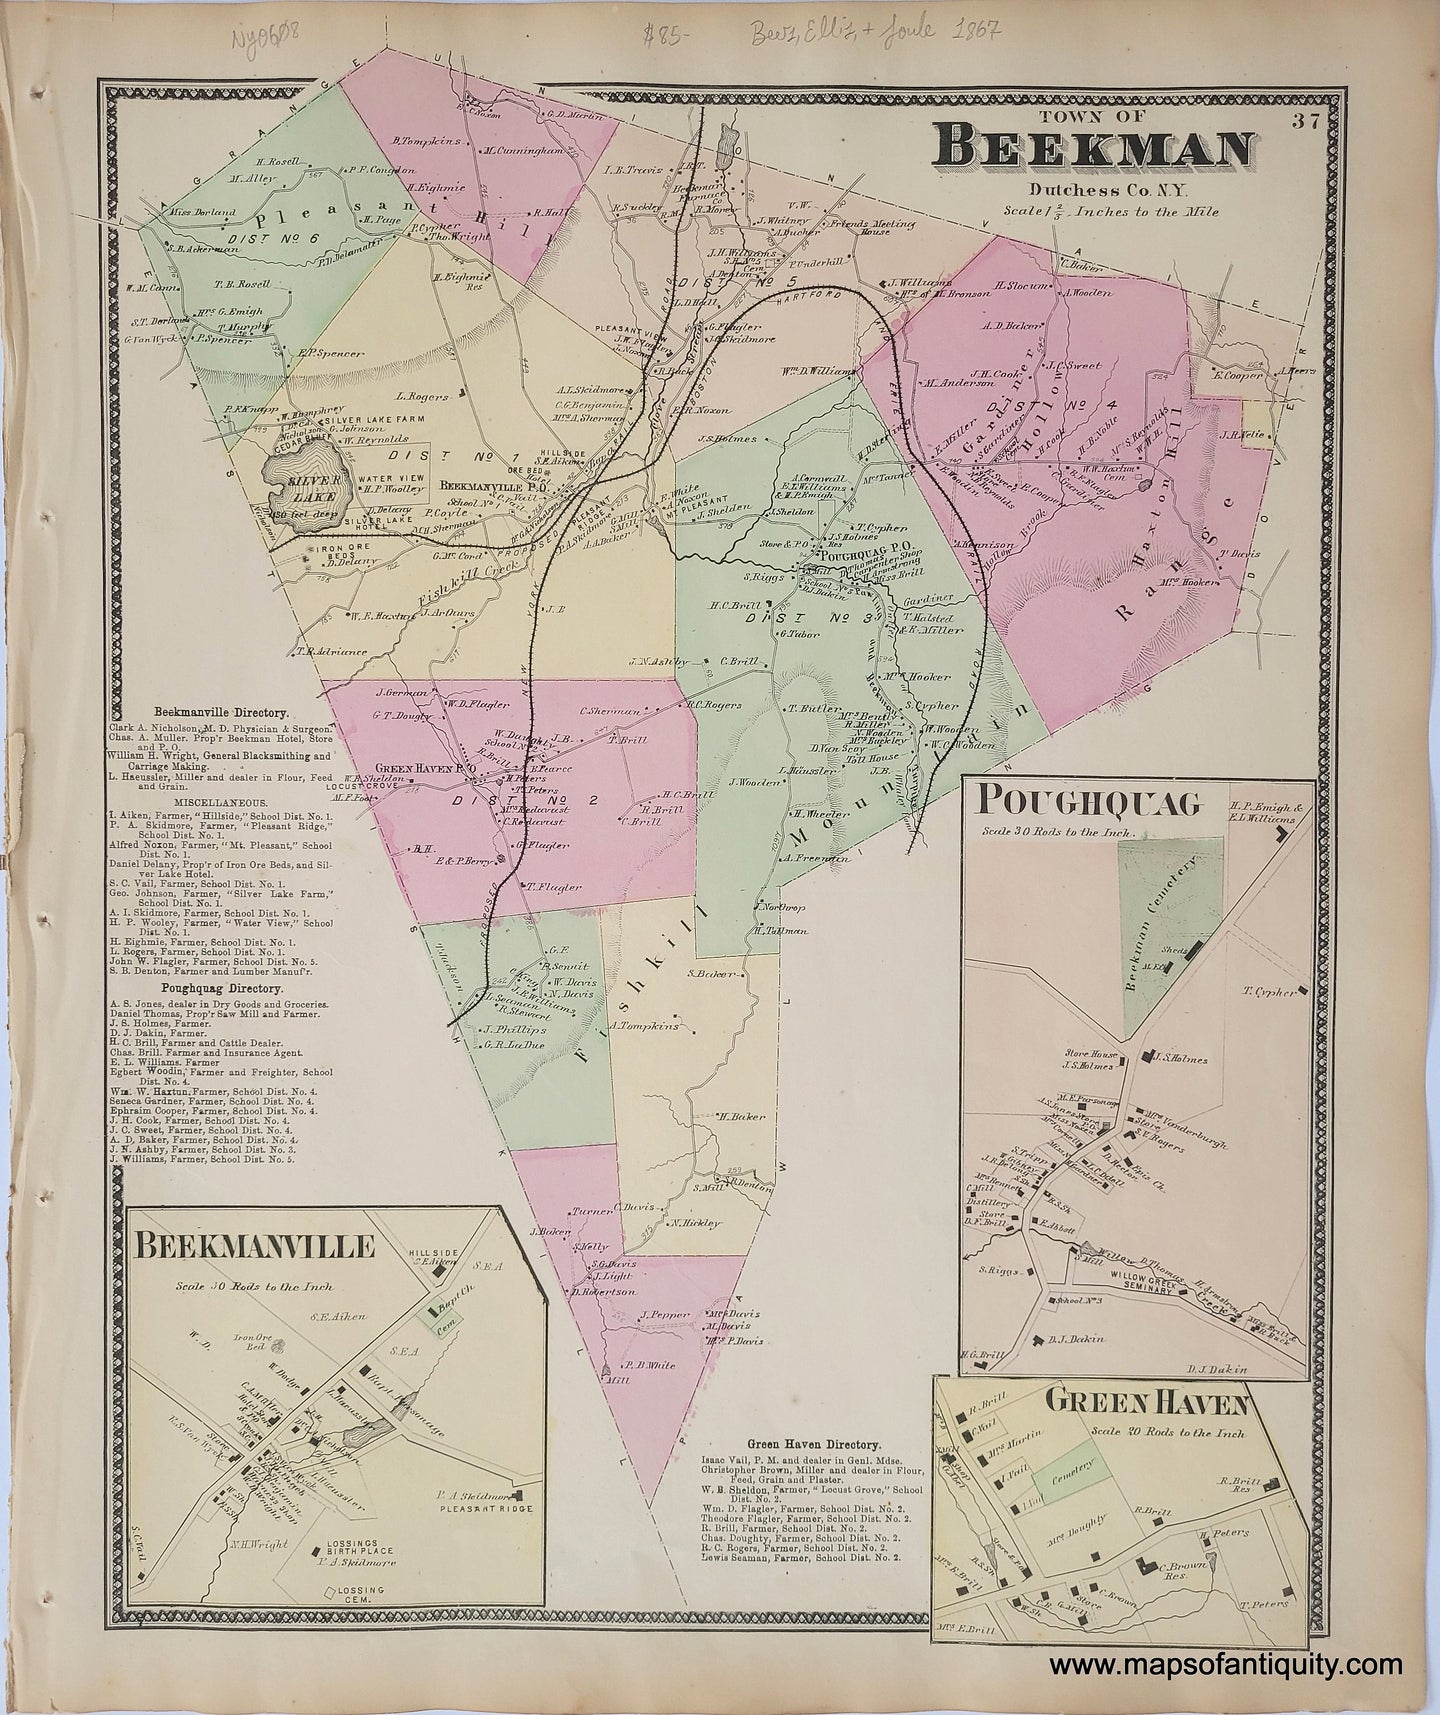 Antique-Hand-Colored-Map-Town-of-Beekman-(NY)-United-States-New-York-1867-Beers-Ellis-and-Soule-Maps-Of-Antiquity